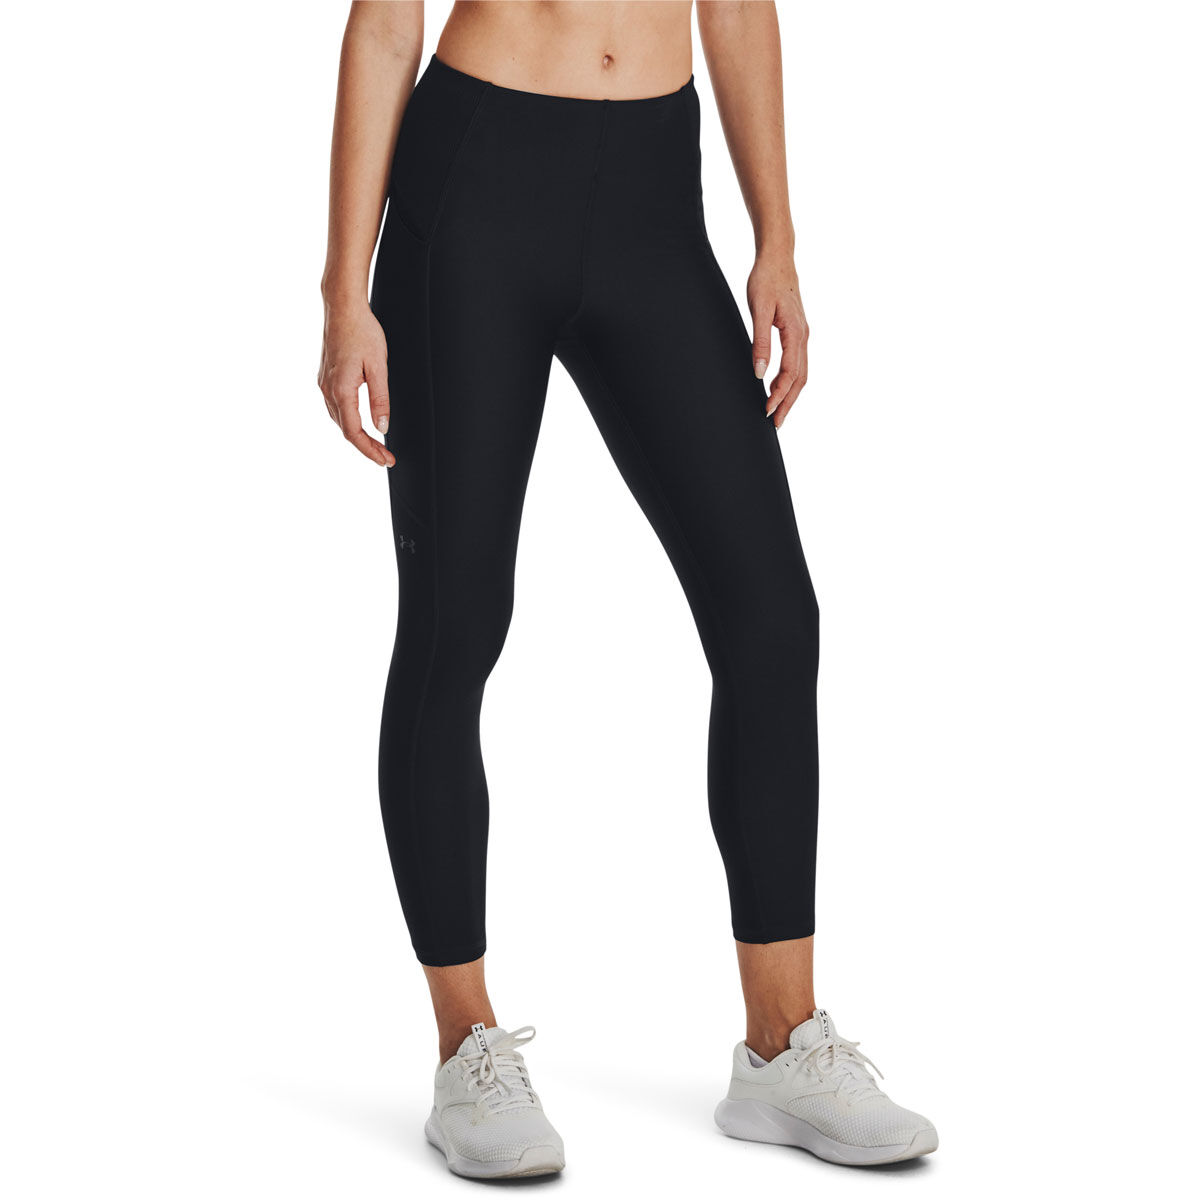 UNDER ARMOUR Women's UA Compression Printed Running Capris NWT